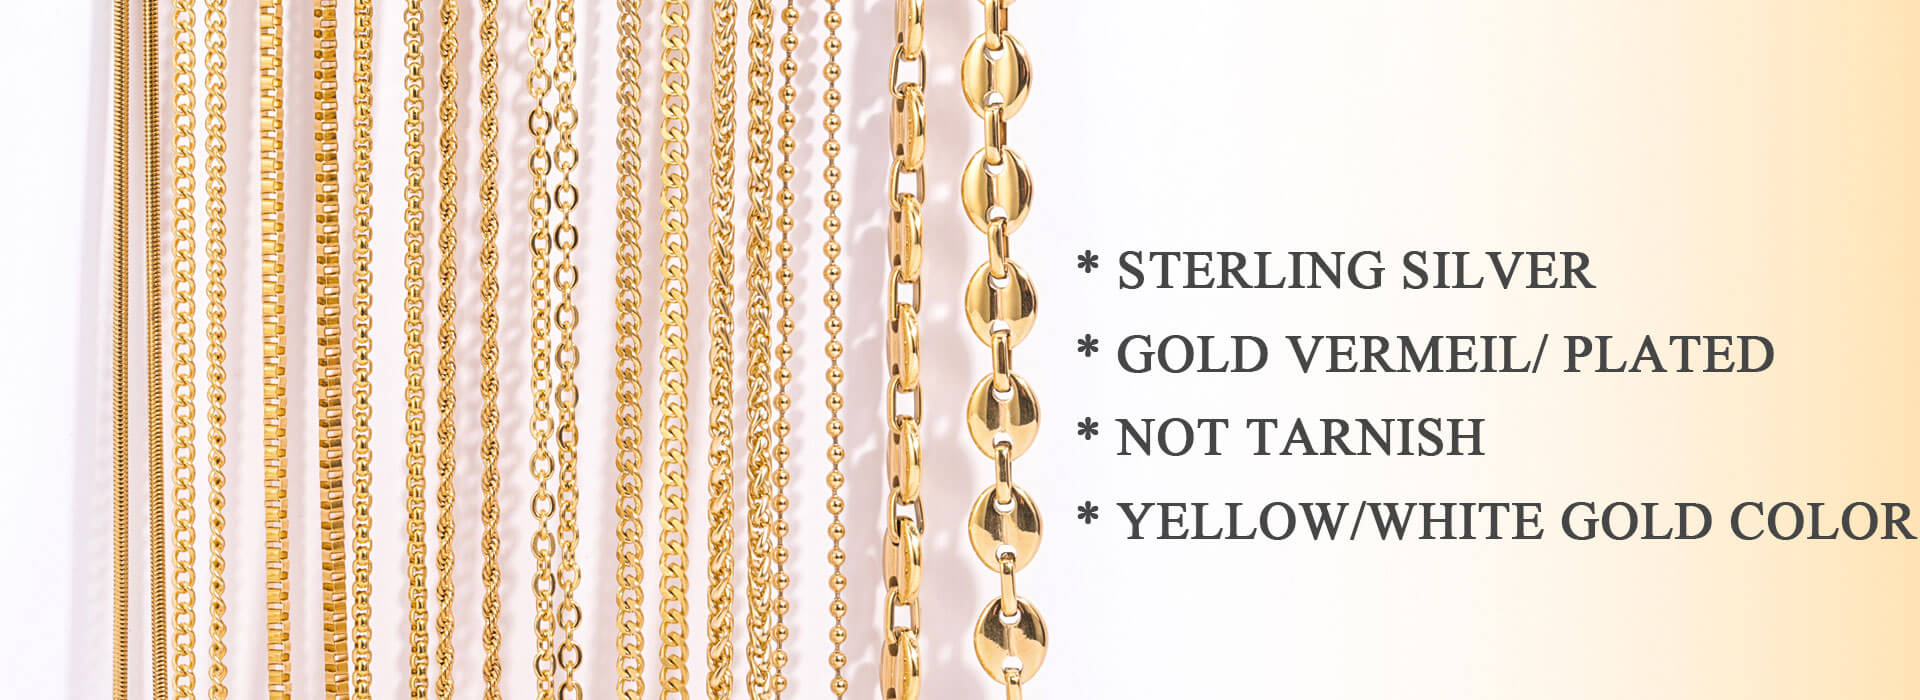 gold vermeil jewelry wholesale, silver jewelry manufacturers, manufacturer of jewellery